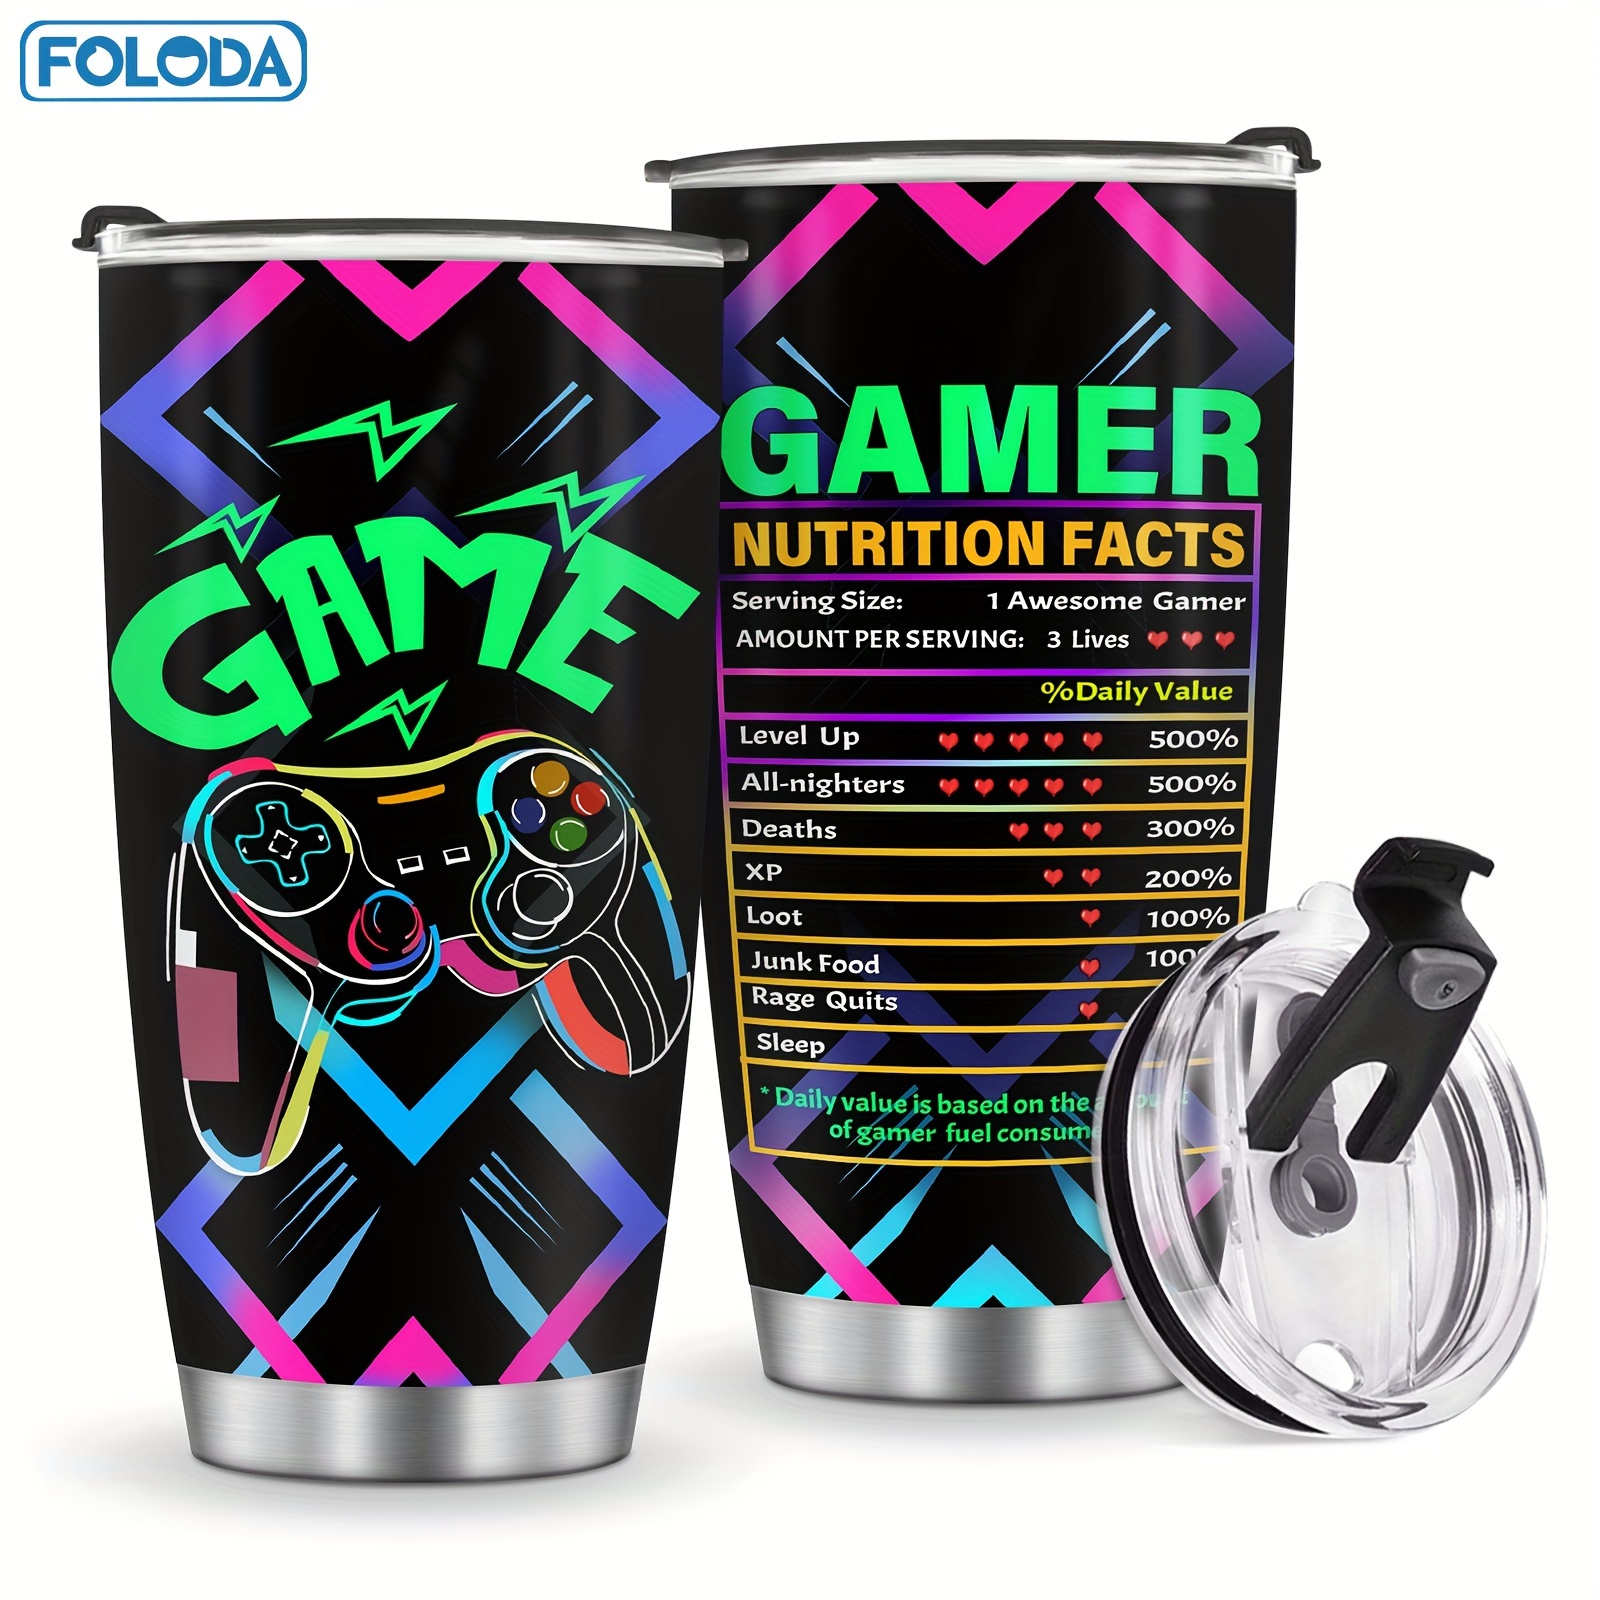 

Foloda 20oz Insulated Gamer Tumbler - Stainless Steel, Keeps Drinks Hot Or Cold, Perfect For Gamers